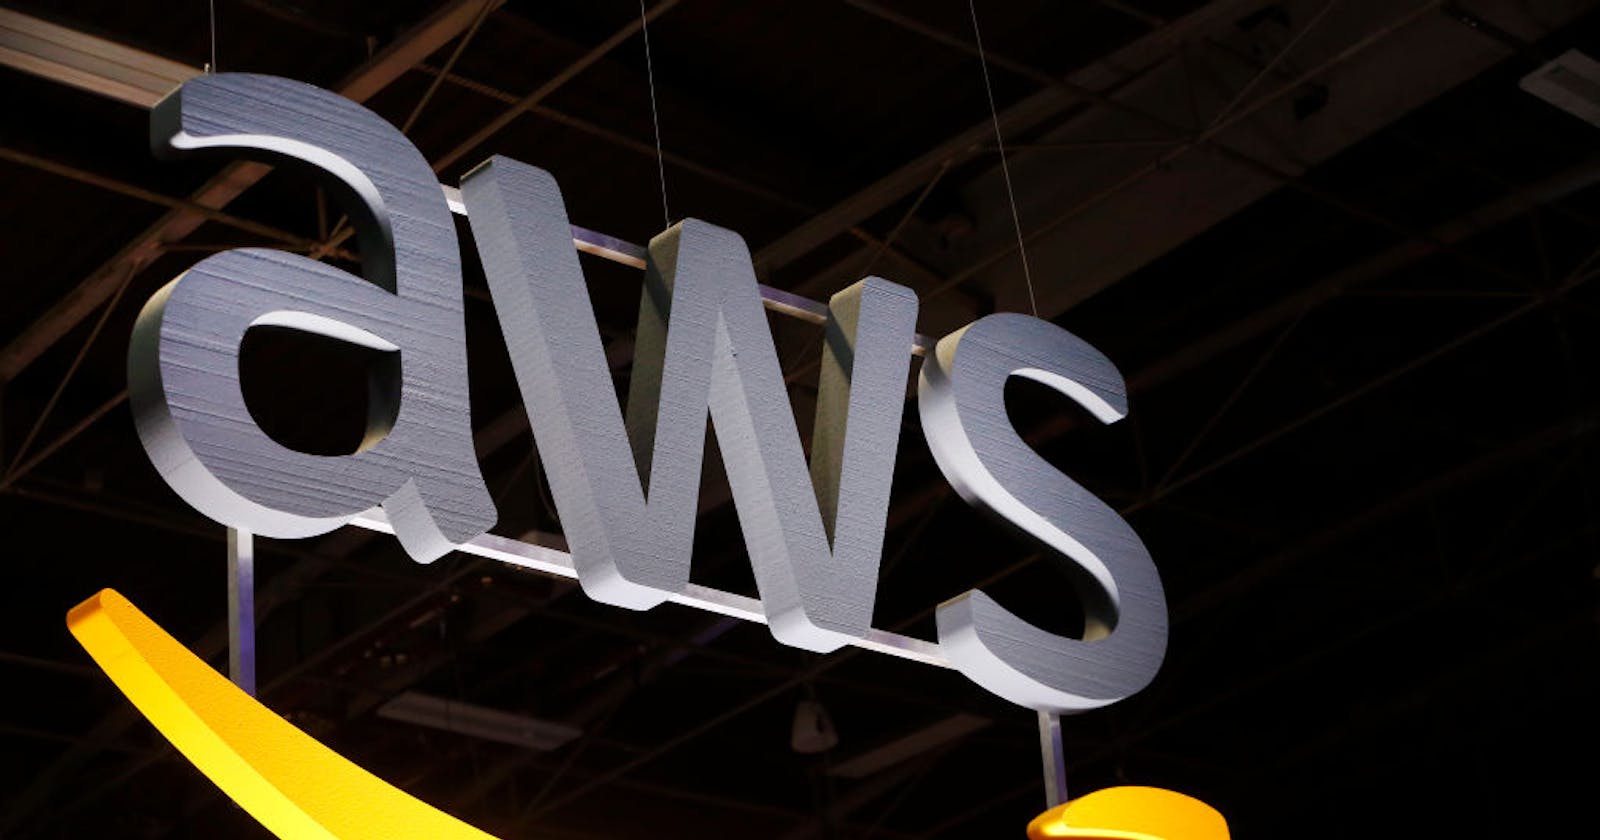 The Top 15 Most Commonly Used AWS Services You Should Know About in 2020